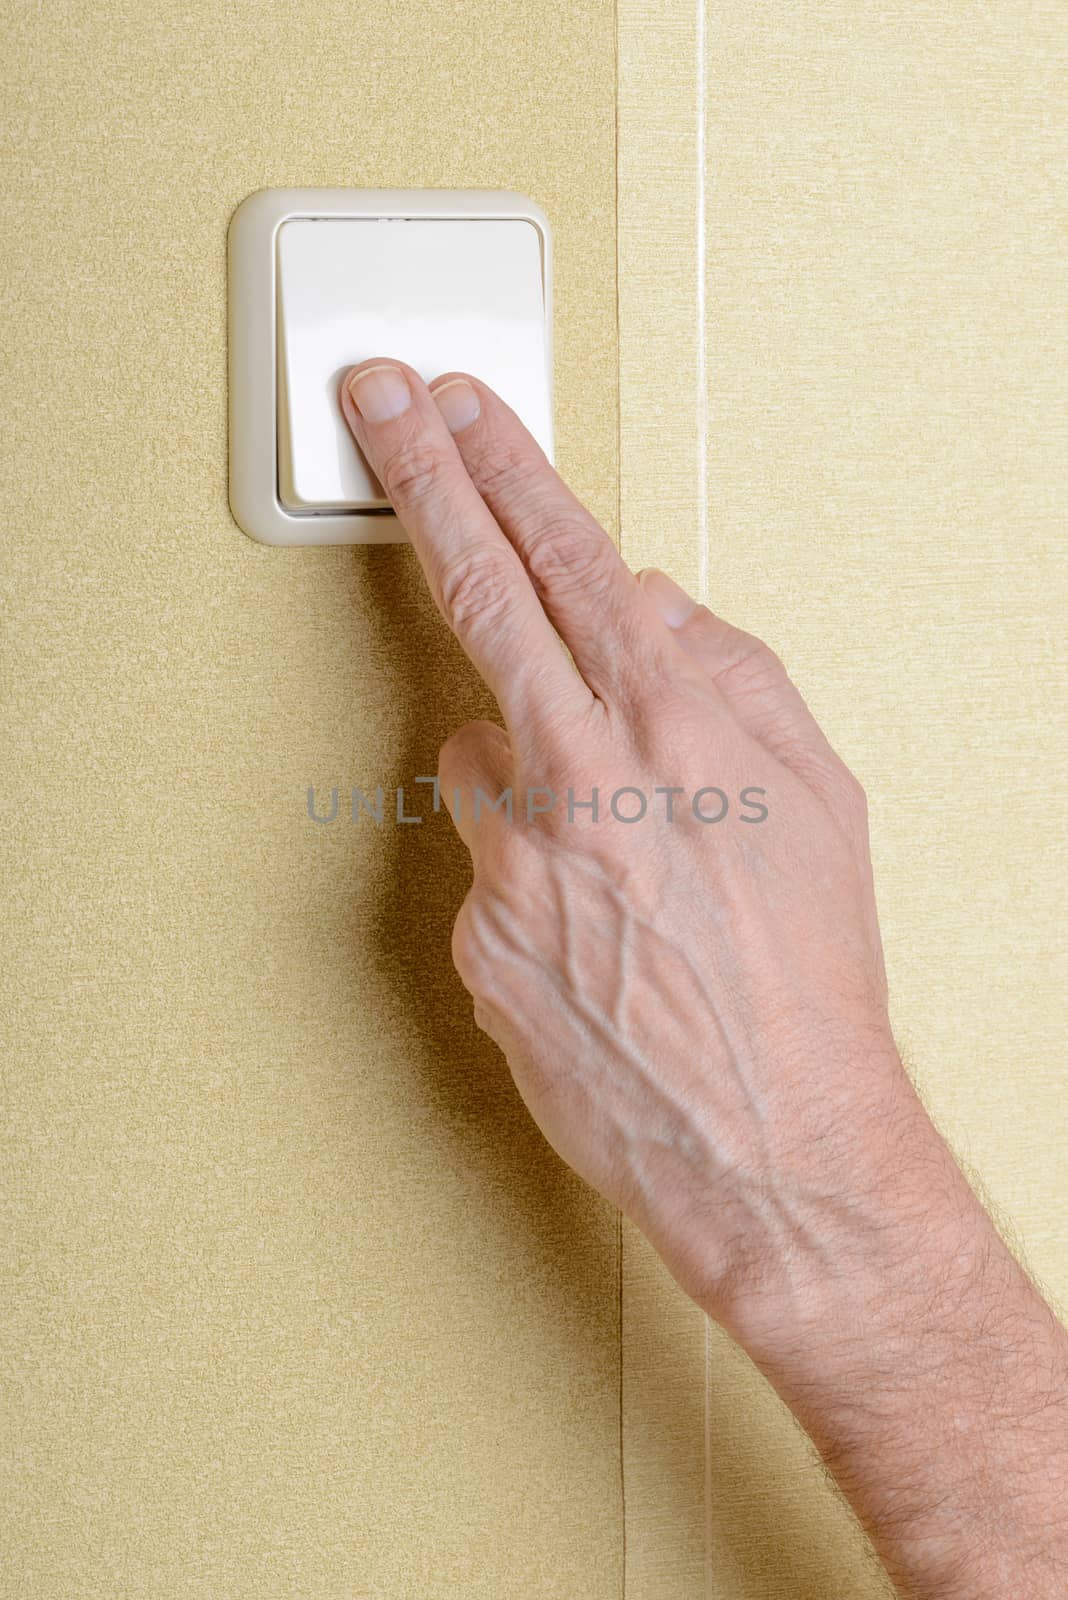 Two fingers switching, in or off, the light with a big square security electric interrupter